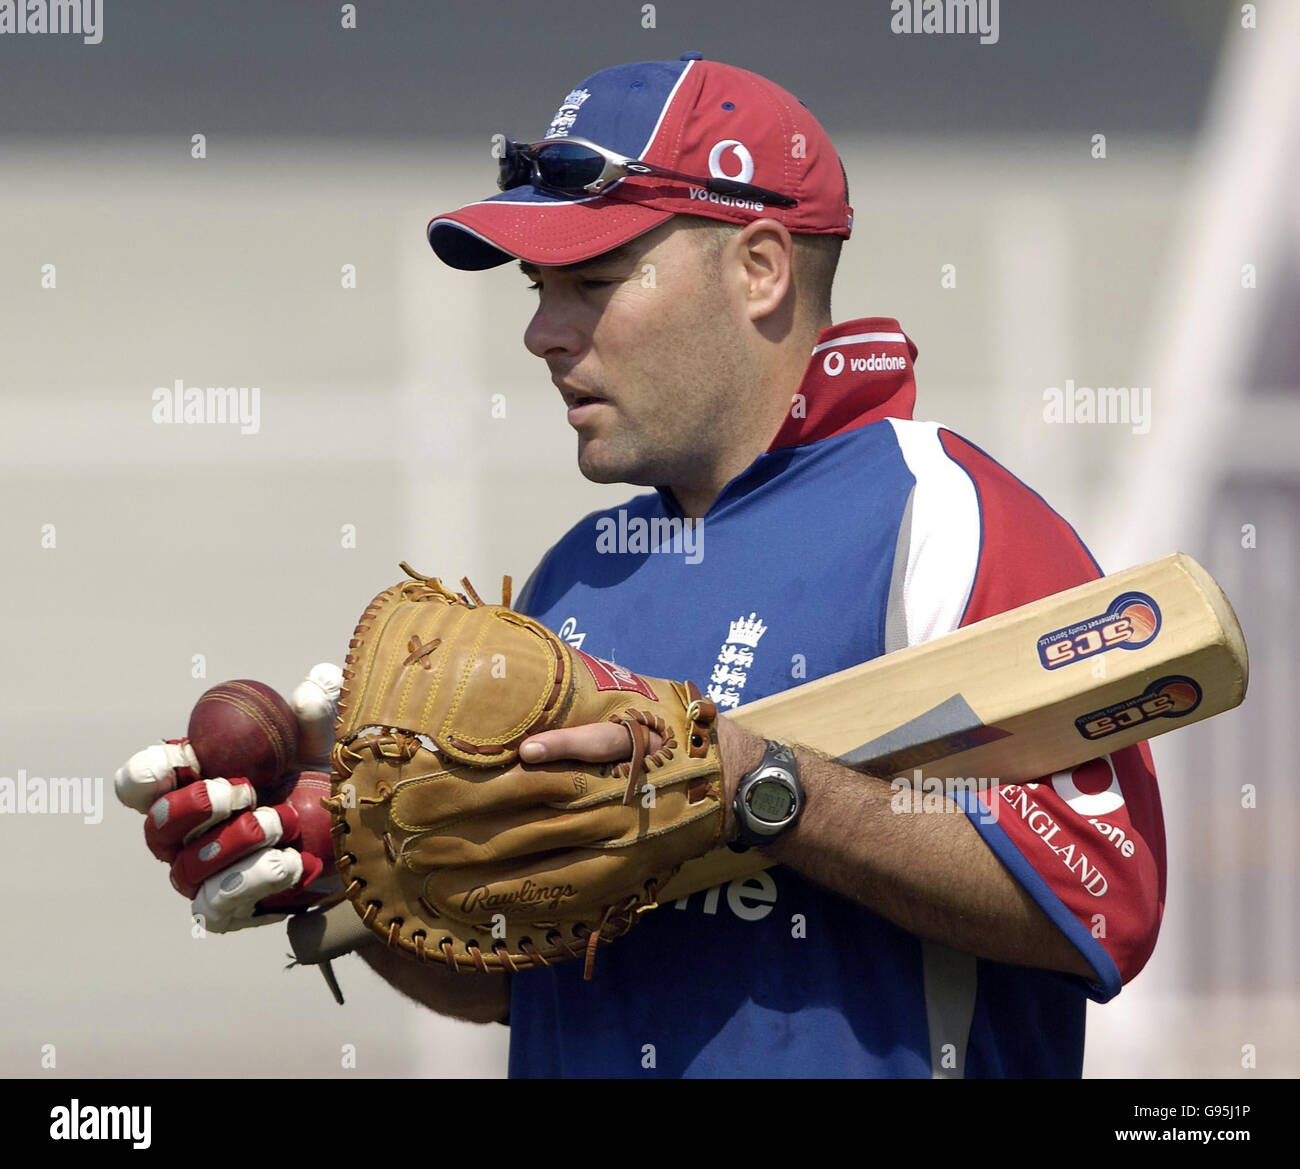 England team analyst Mark Garaway during net practice at the Cricket Club of India, Brabourne Stadium, Bombay, India, Friday February 17, 2006. PRESS ASSOCIATION Photo. Photo credit should read: Rebecca Naden/PA. Stock Photo